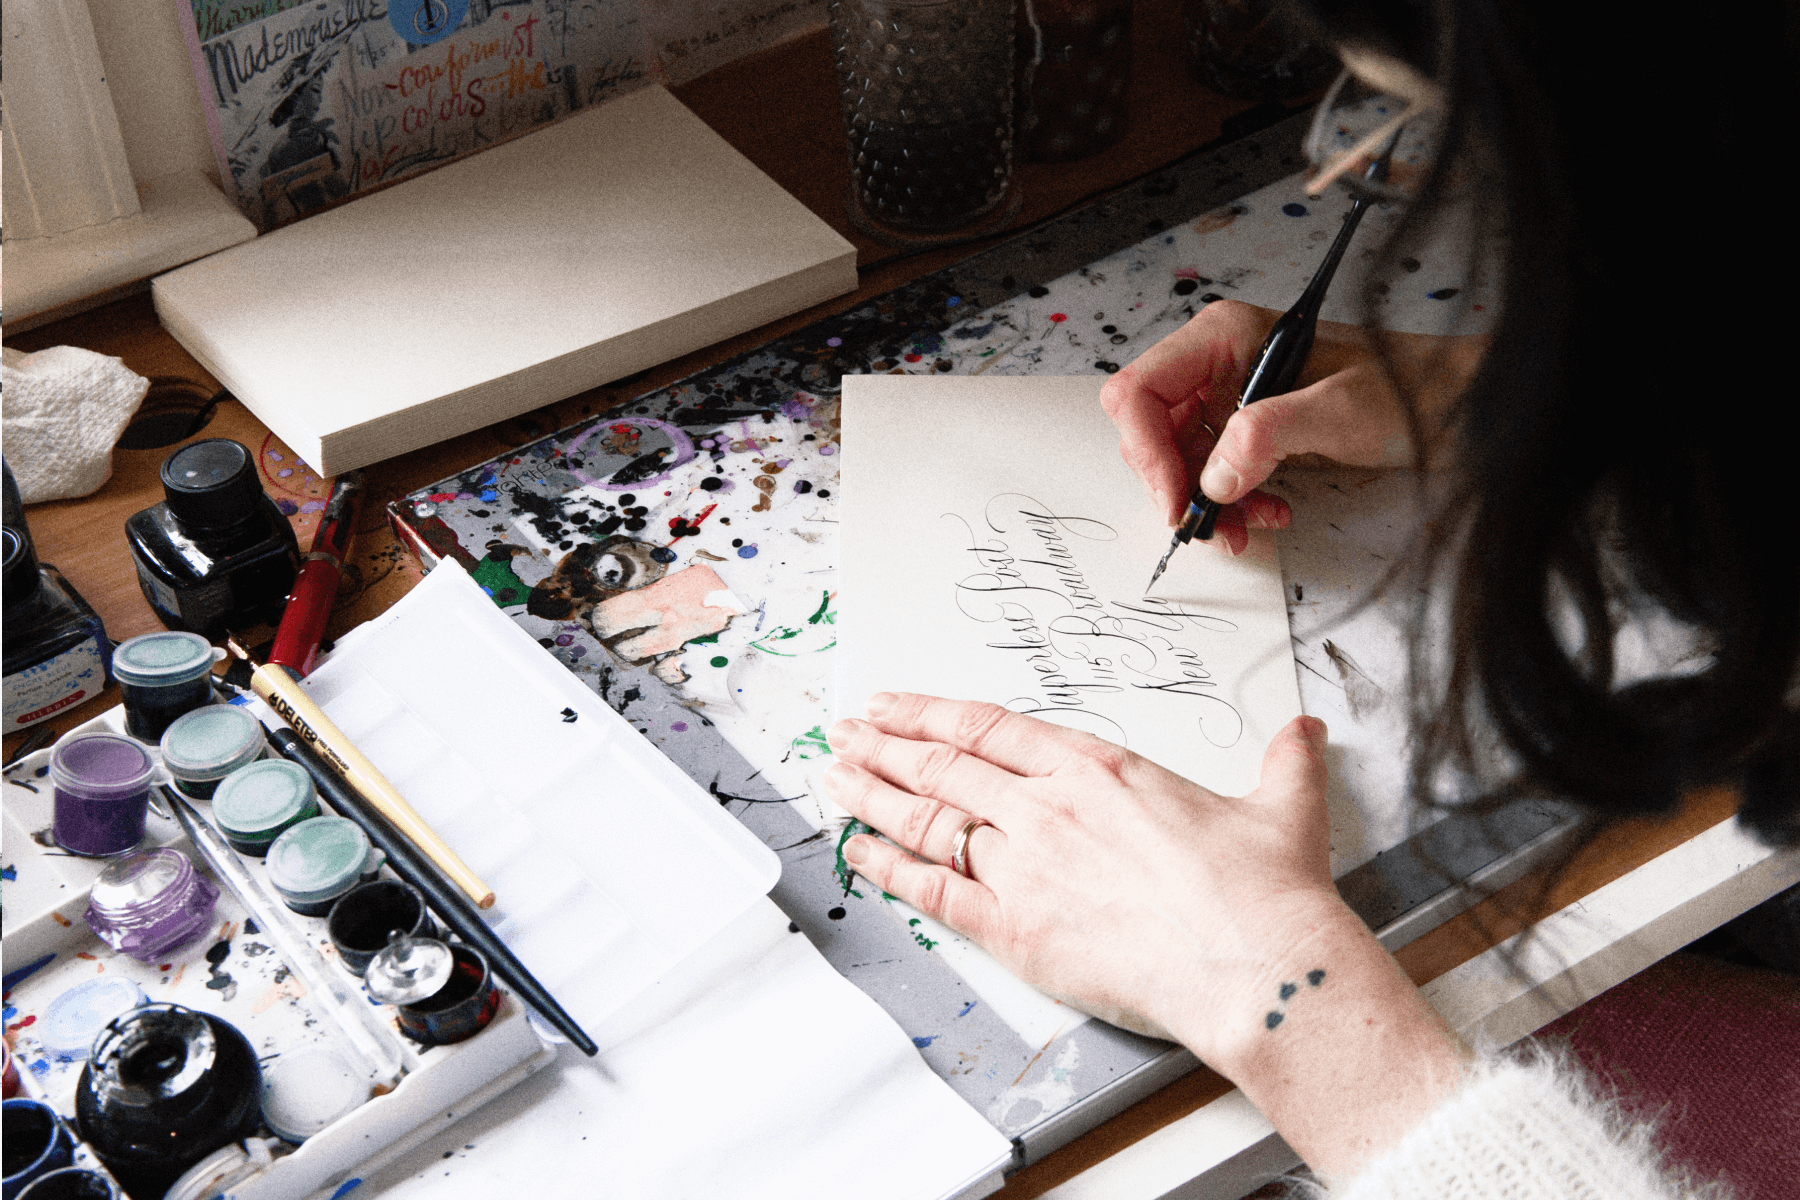 Stephanie Fishwick sitting at her desk writing calligraphy, surrounded by paint and ink.